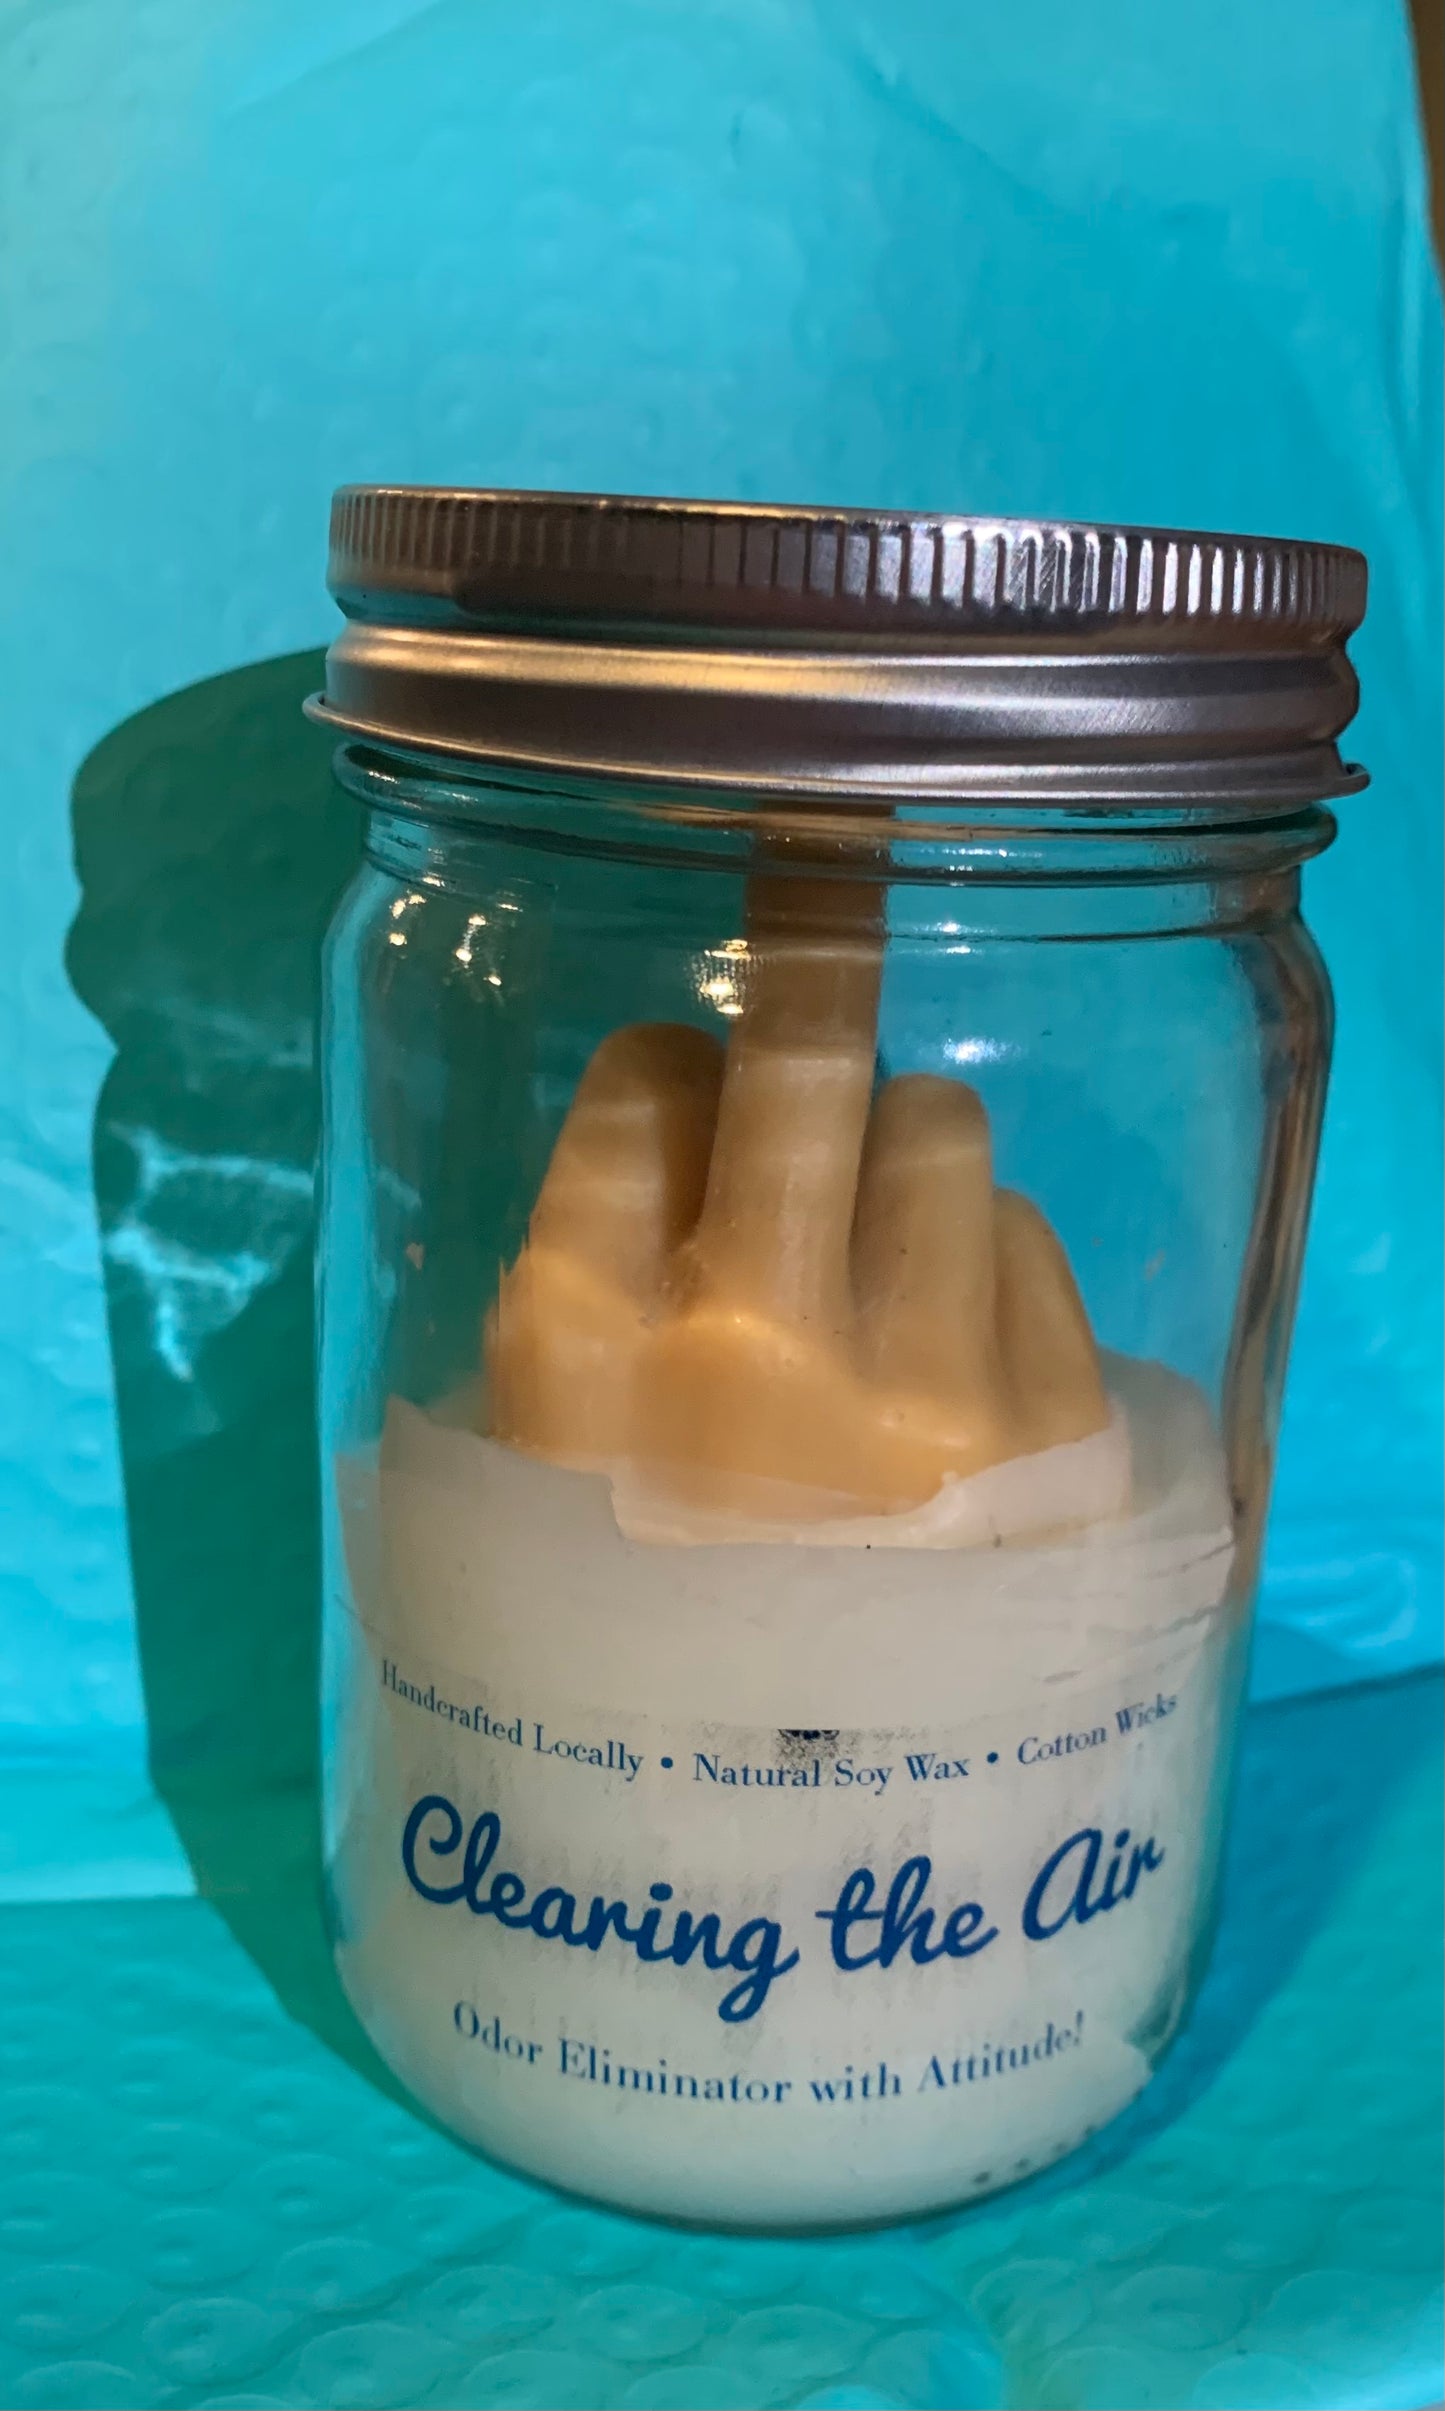 F- You Middle Finger Candle - Wiselyonsoapworks